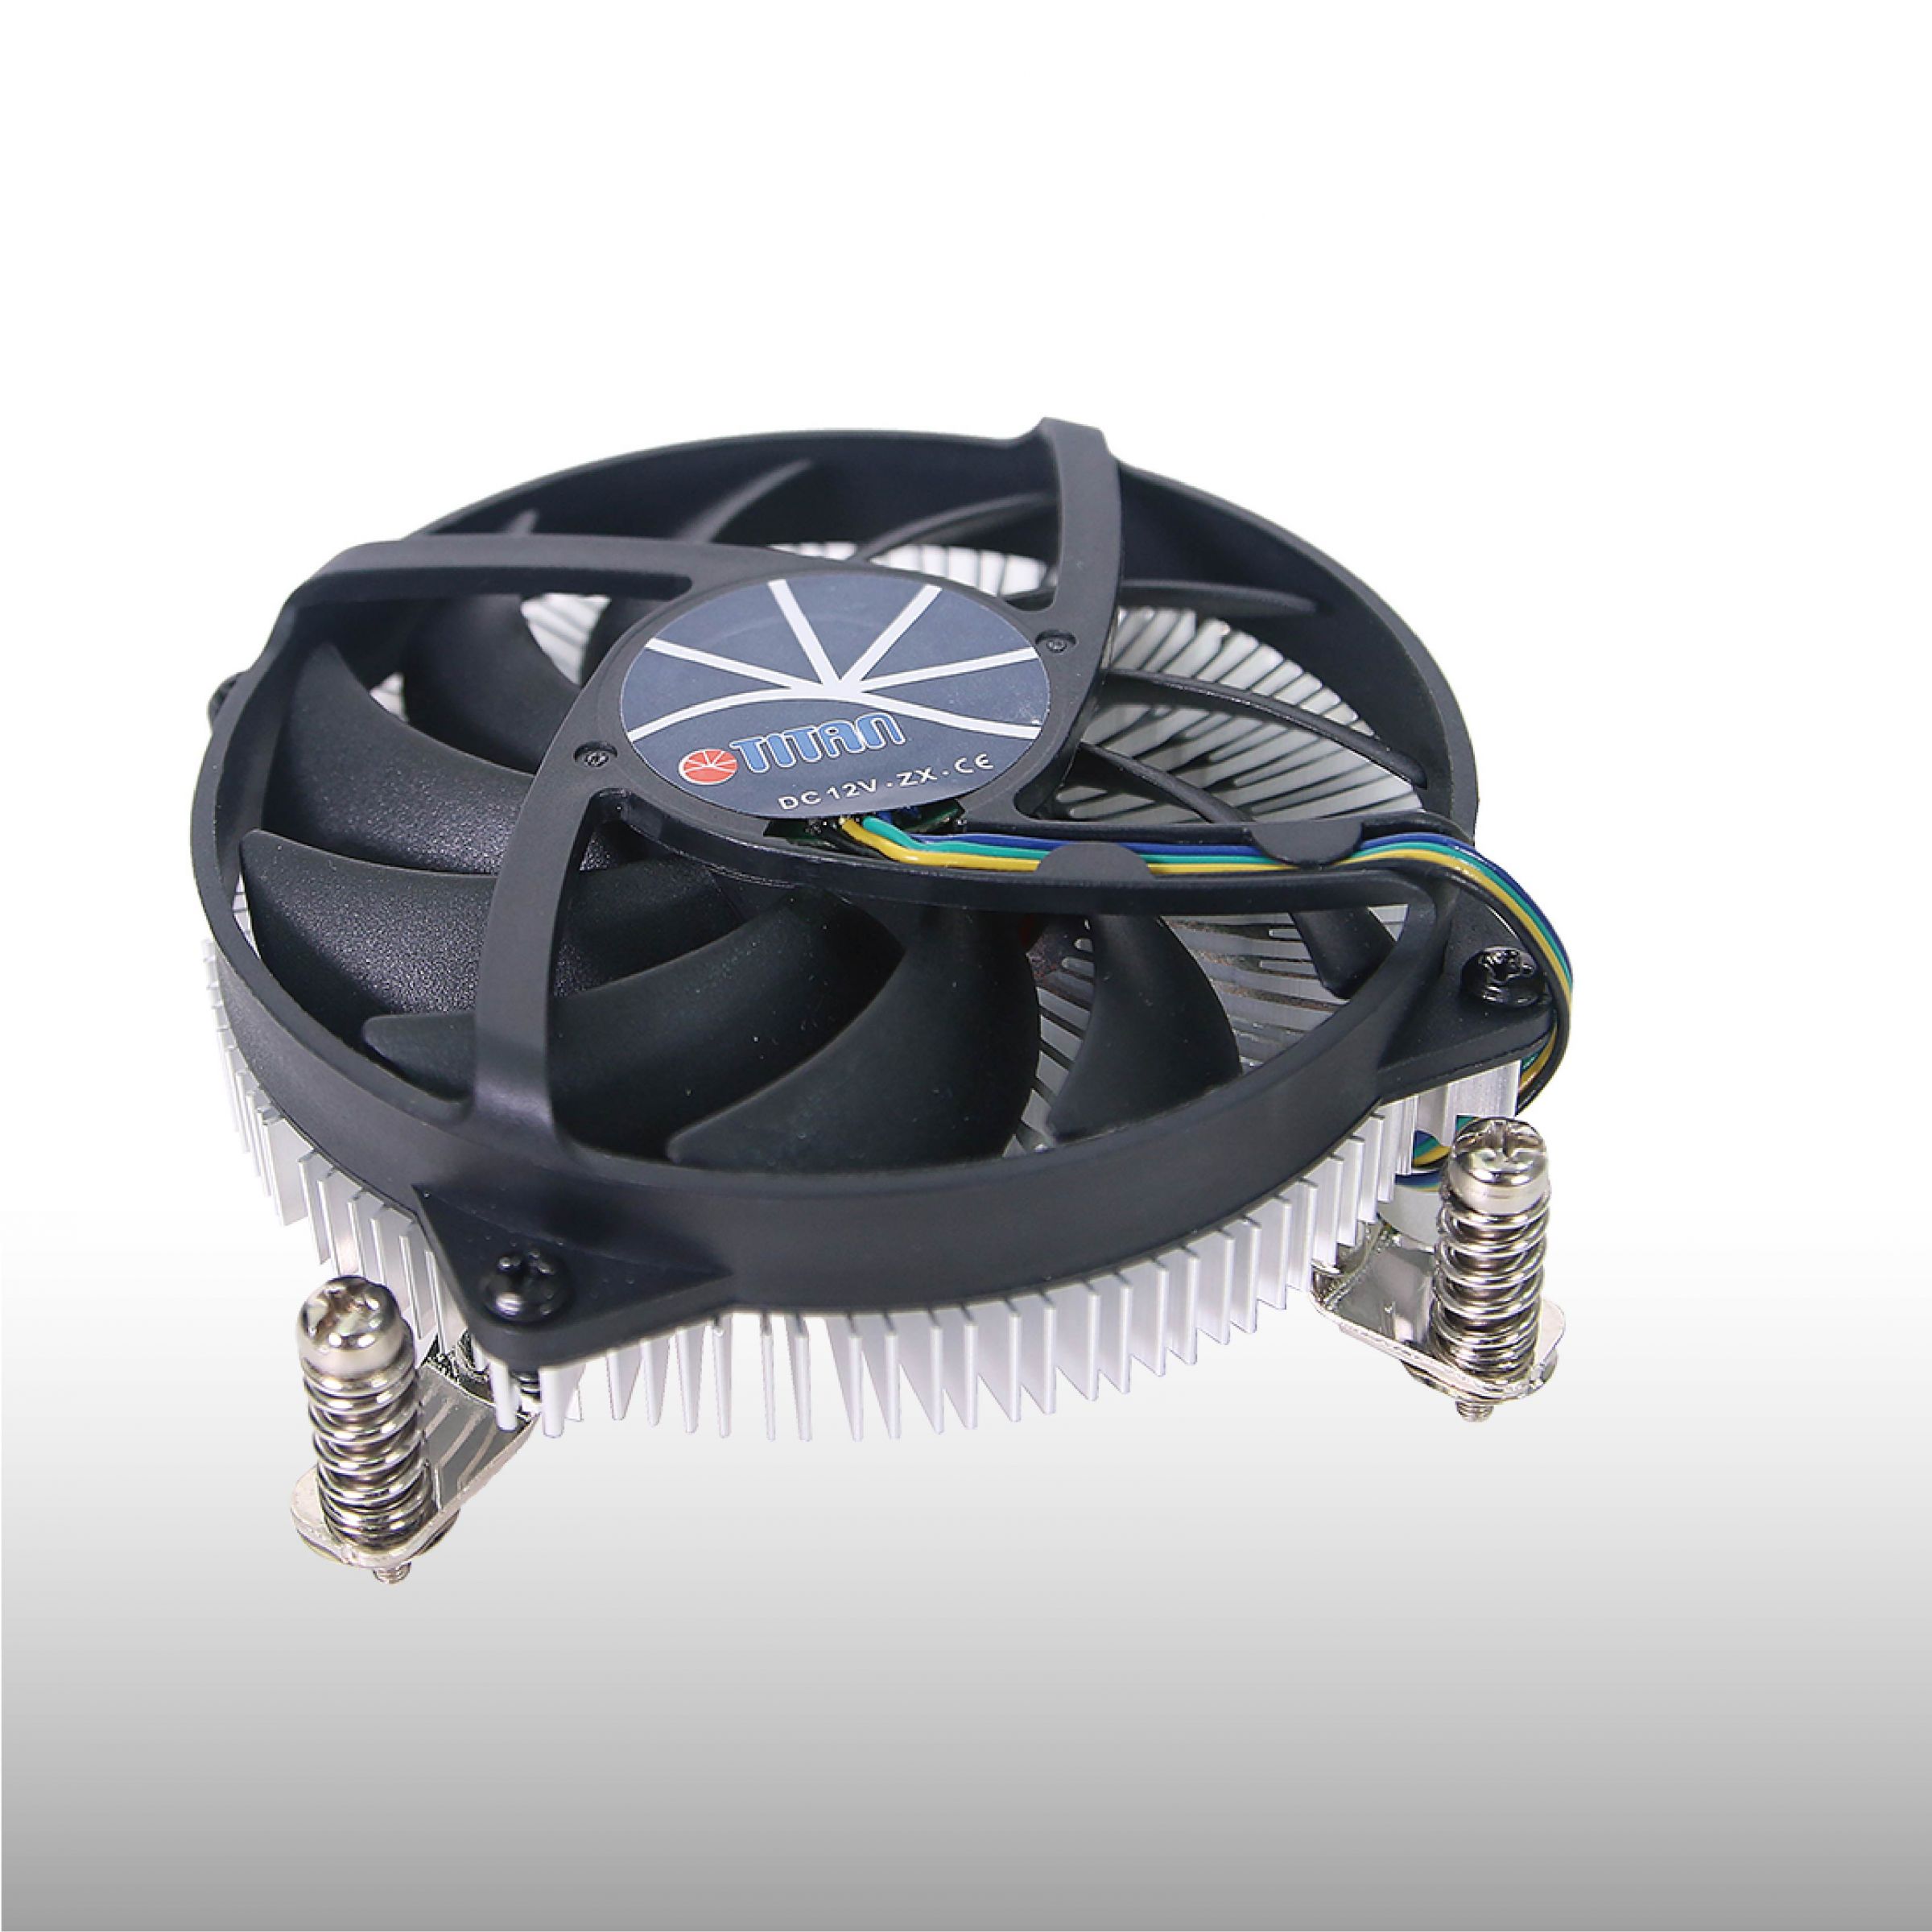 Intel LGA 1700- Low Profile Design CPU Air Cooler with Aluminum Cooling  Fins/ TDP 65W - CPU Cooler, Cooler, Made in Taiwan Custom RV Fans and PC  Cooling Fans Manufacturer